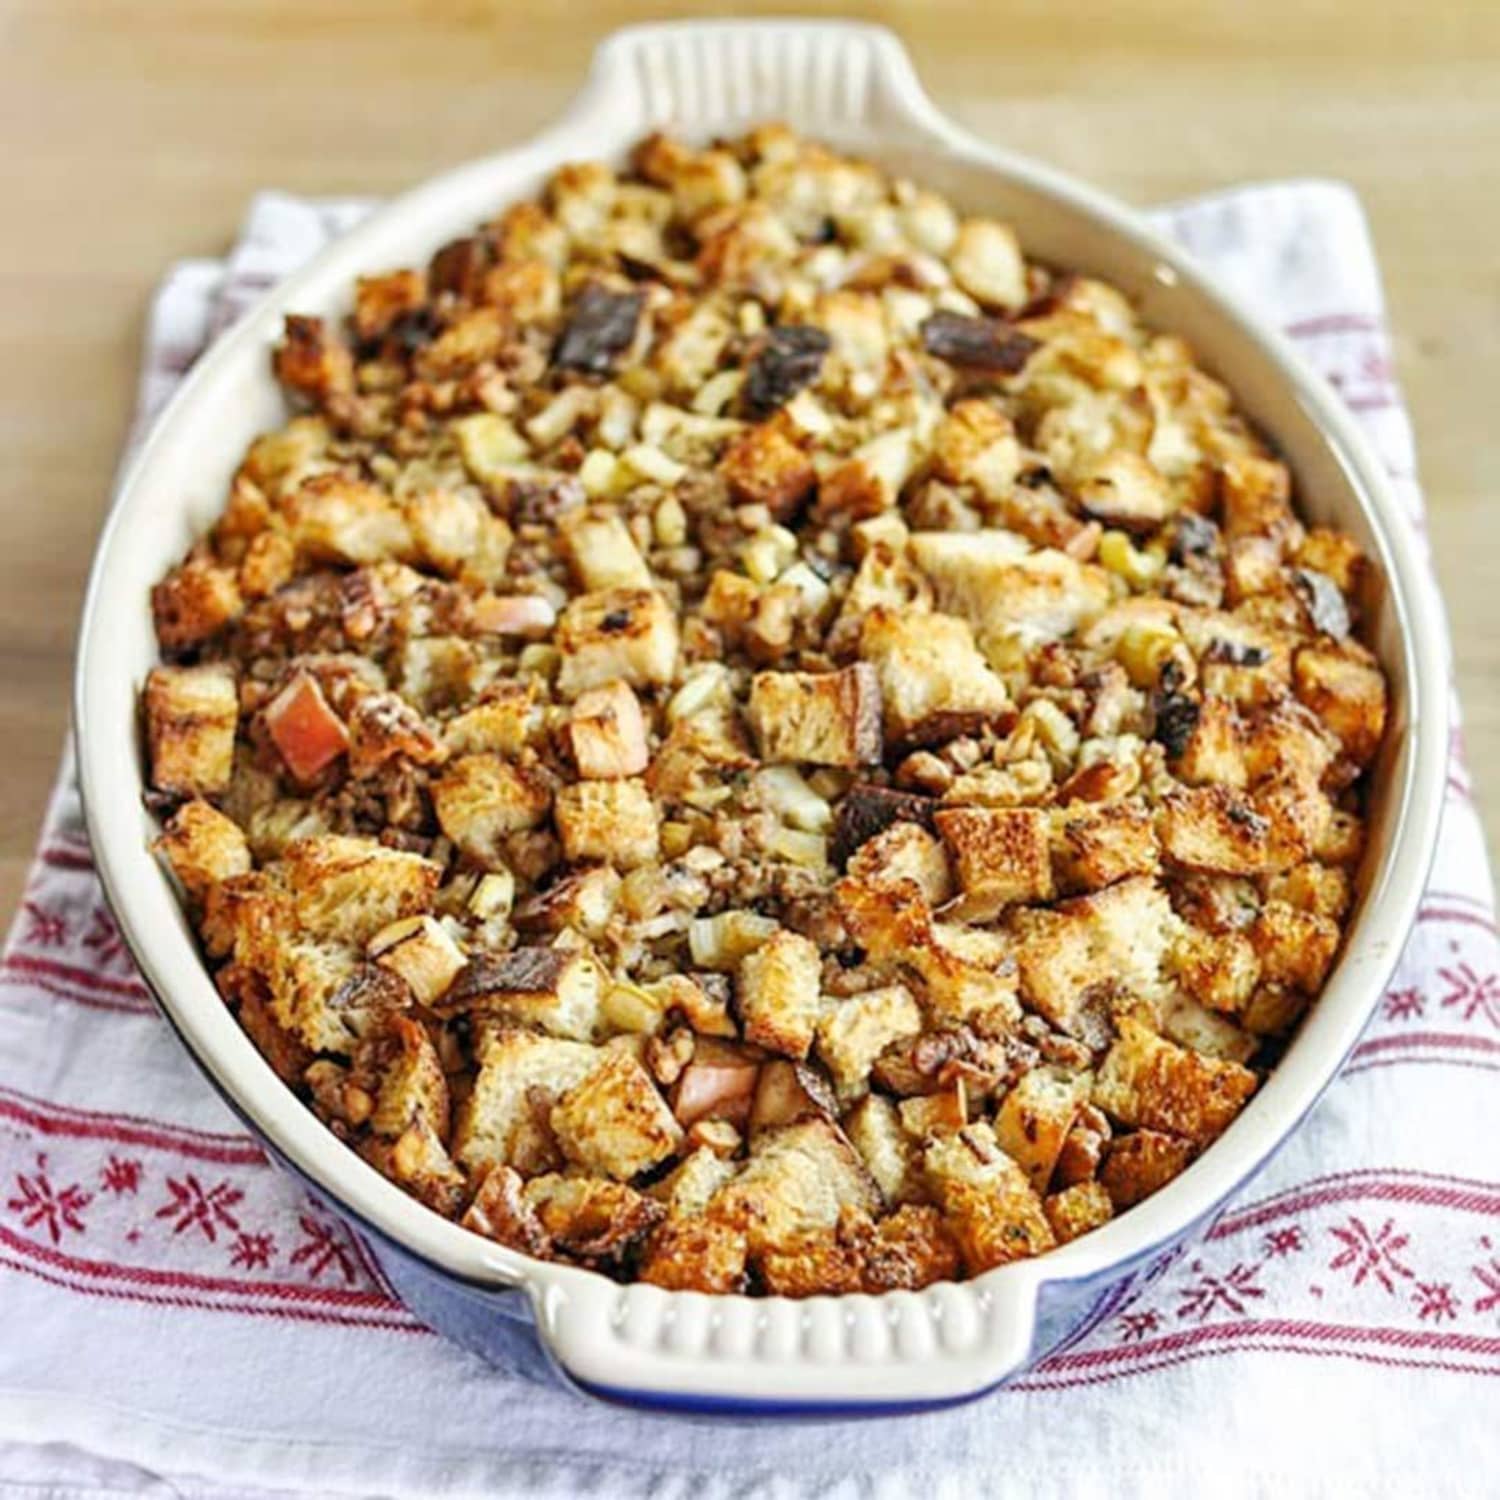 How to Make Easy Thanksgiving Stuffing